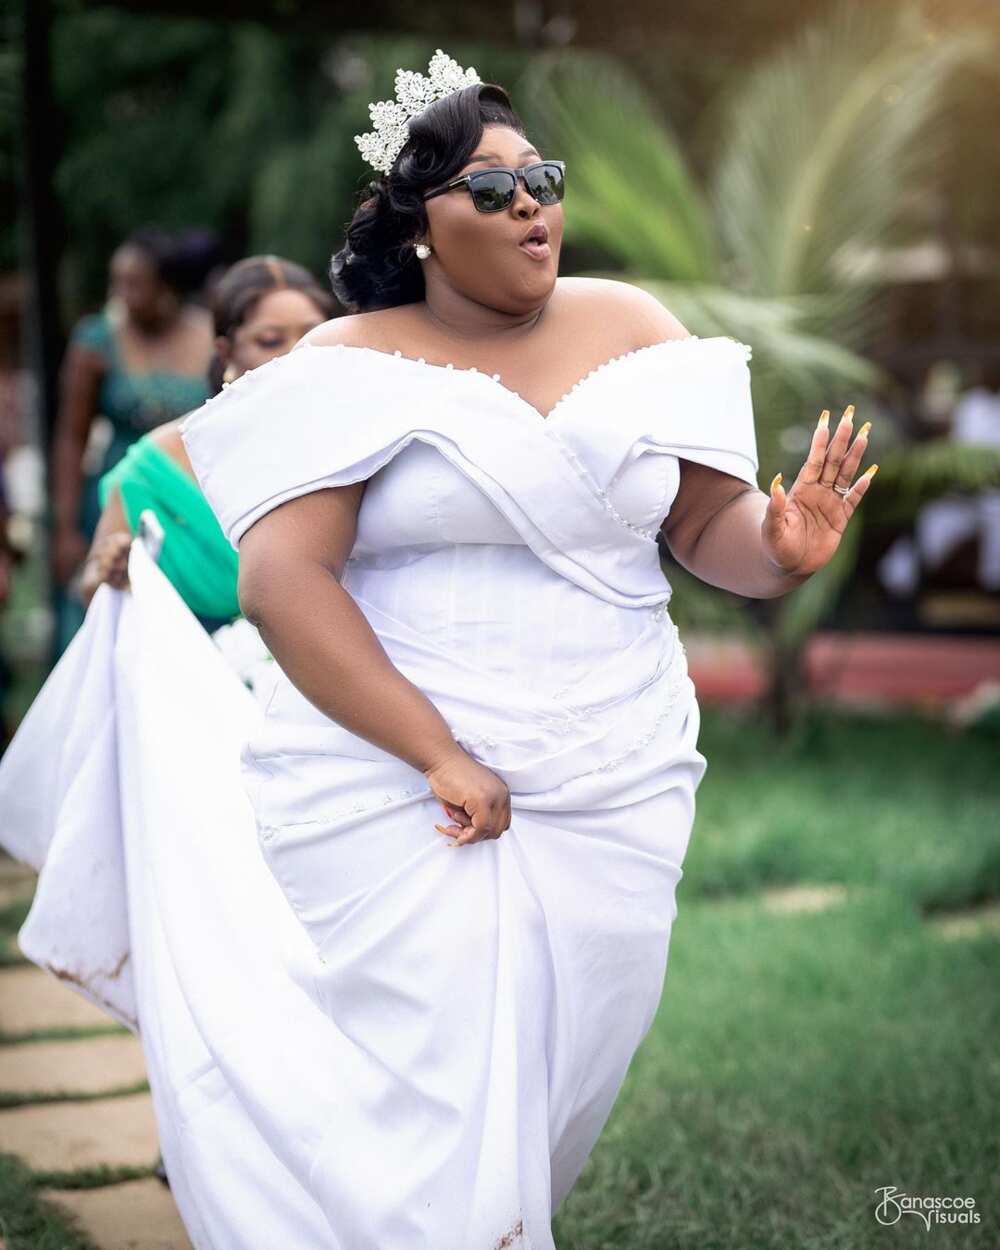 Stunning Photos: Meet The Plus-Size Bride Who Has Taken Over Instagram With Her Wedding Photos